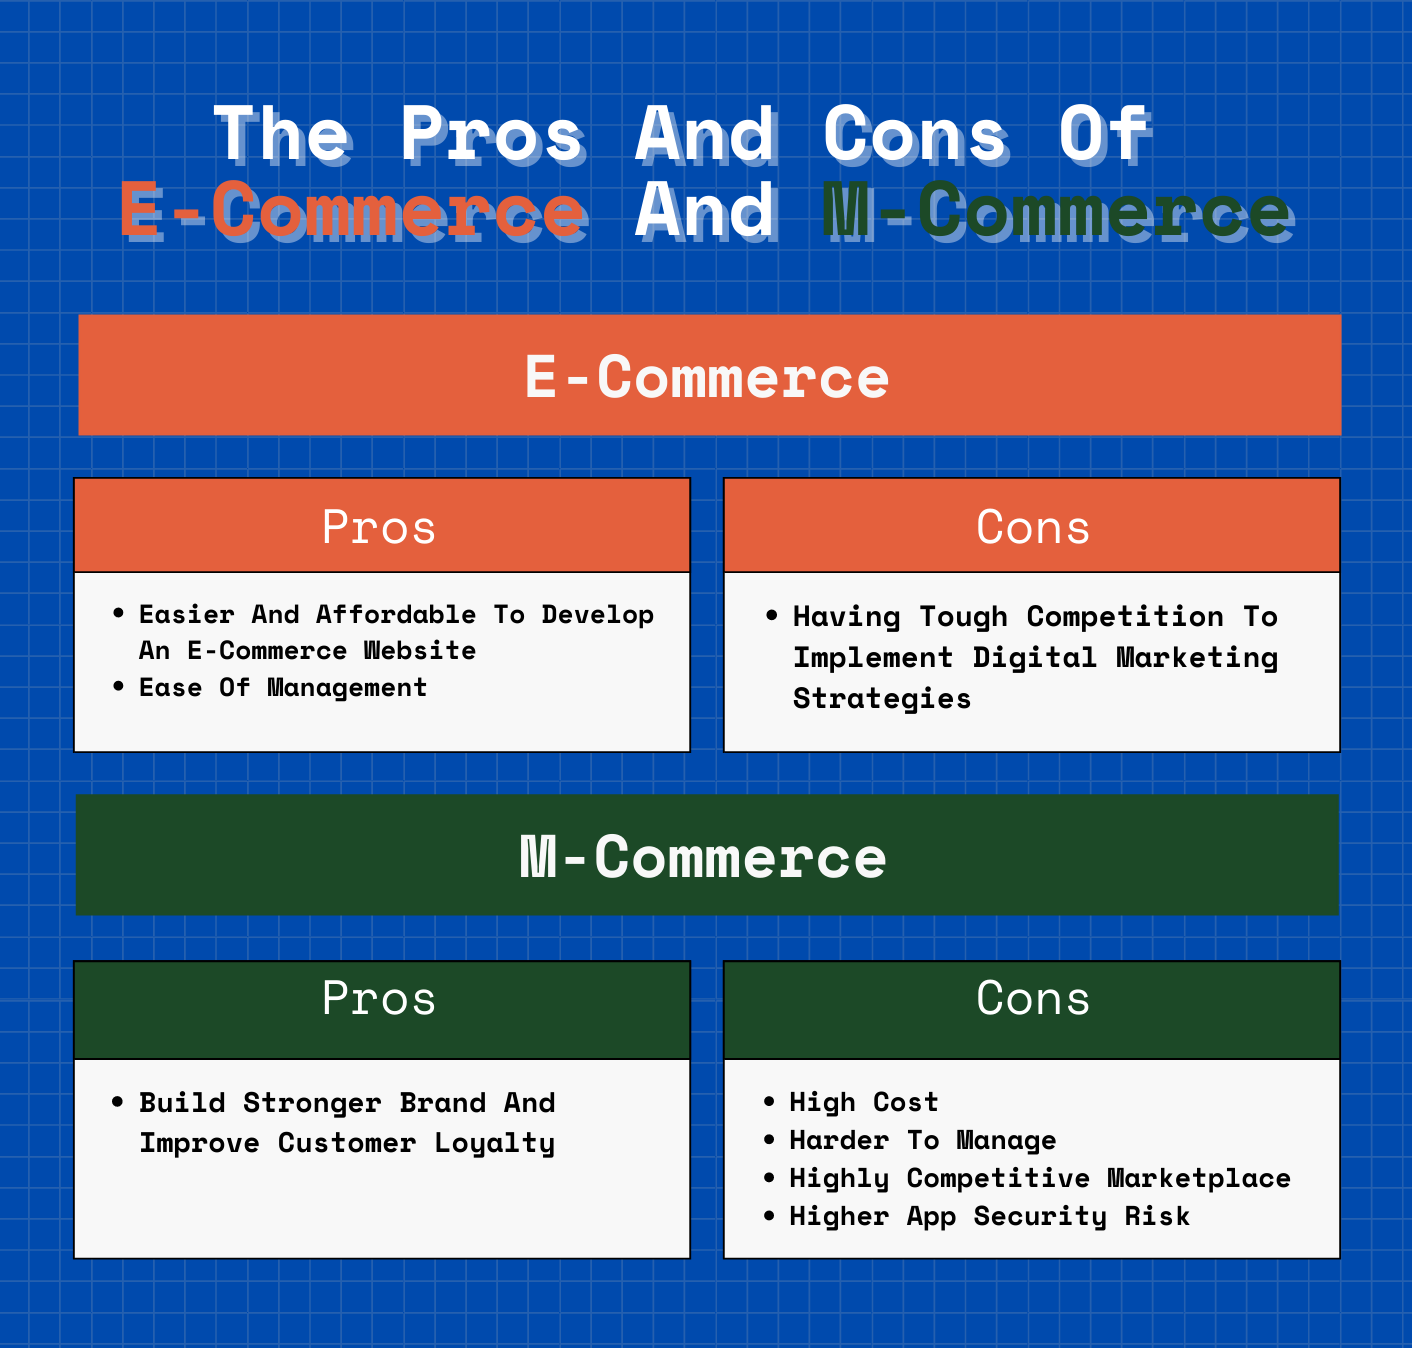 Pros And Cons Of E-Commerce And M-Commerce